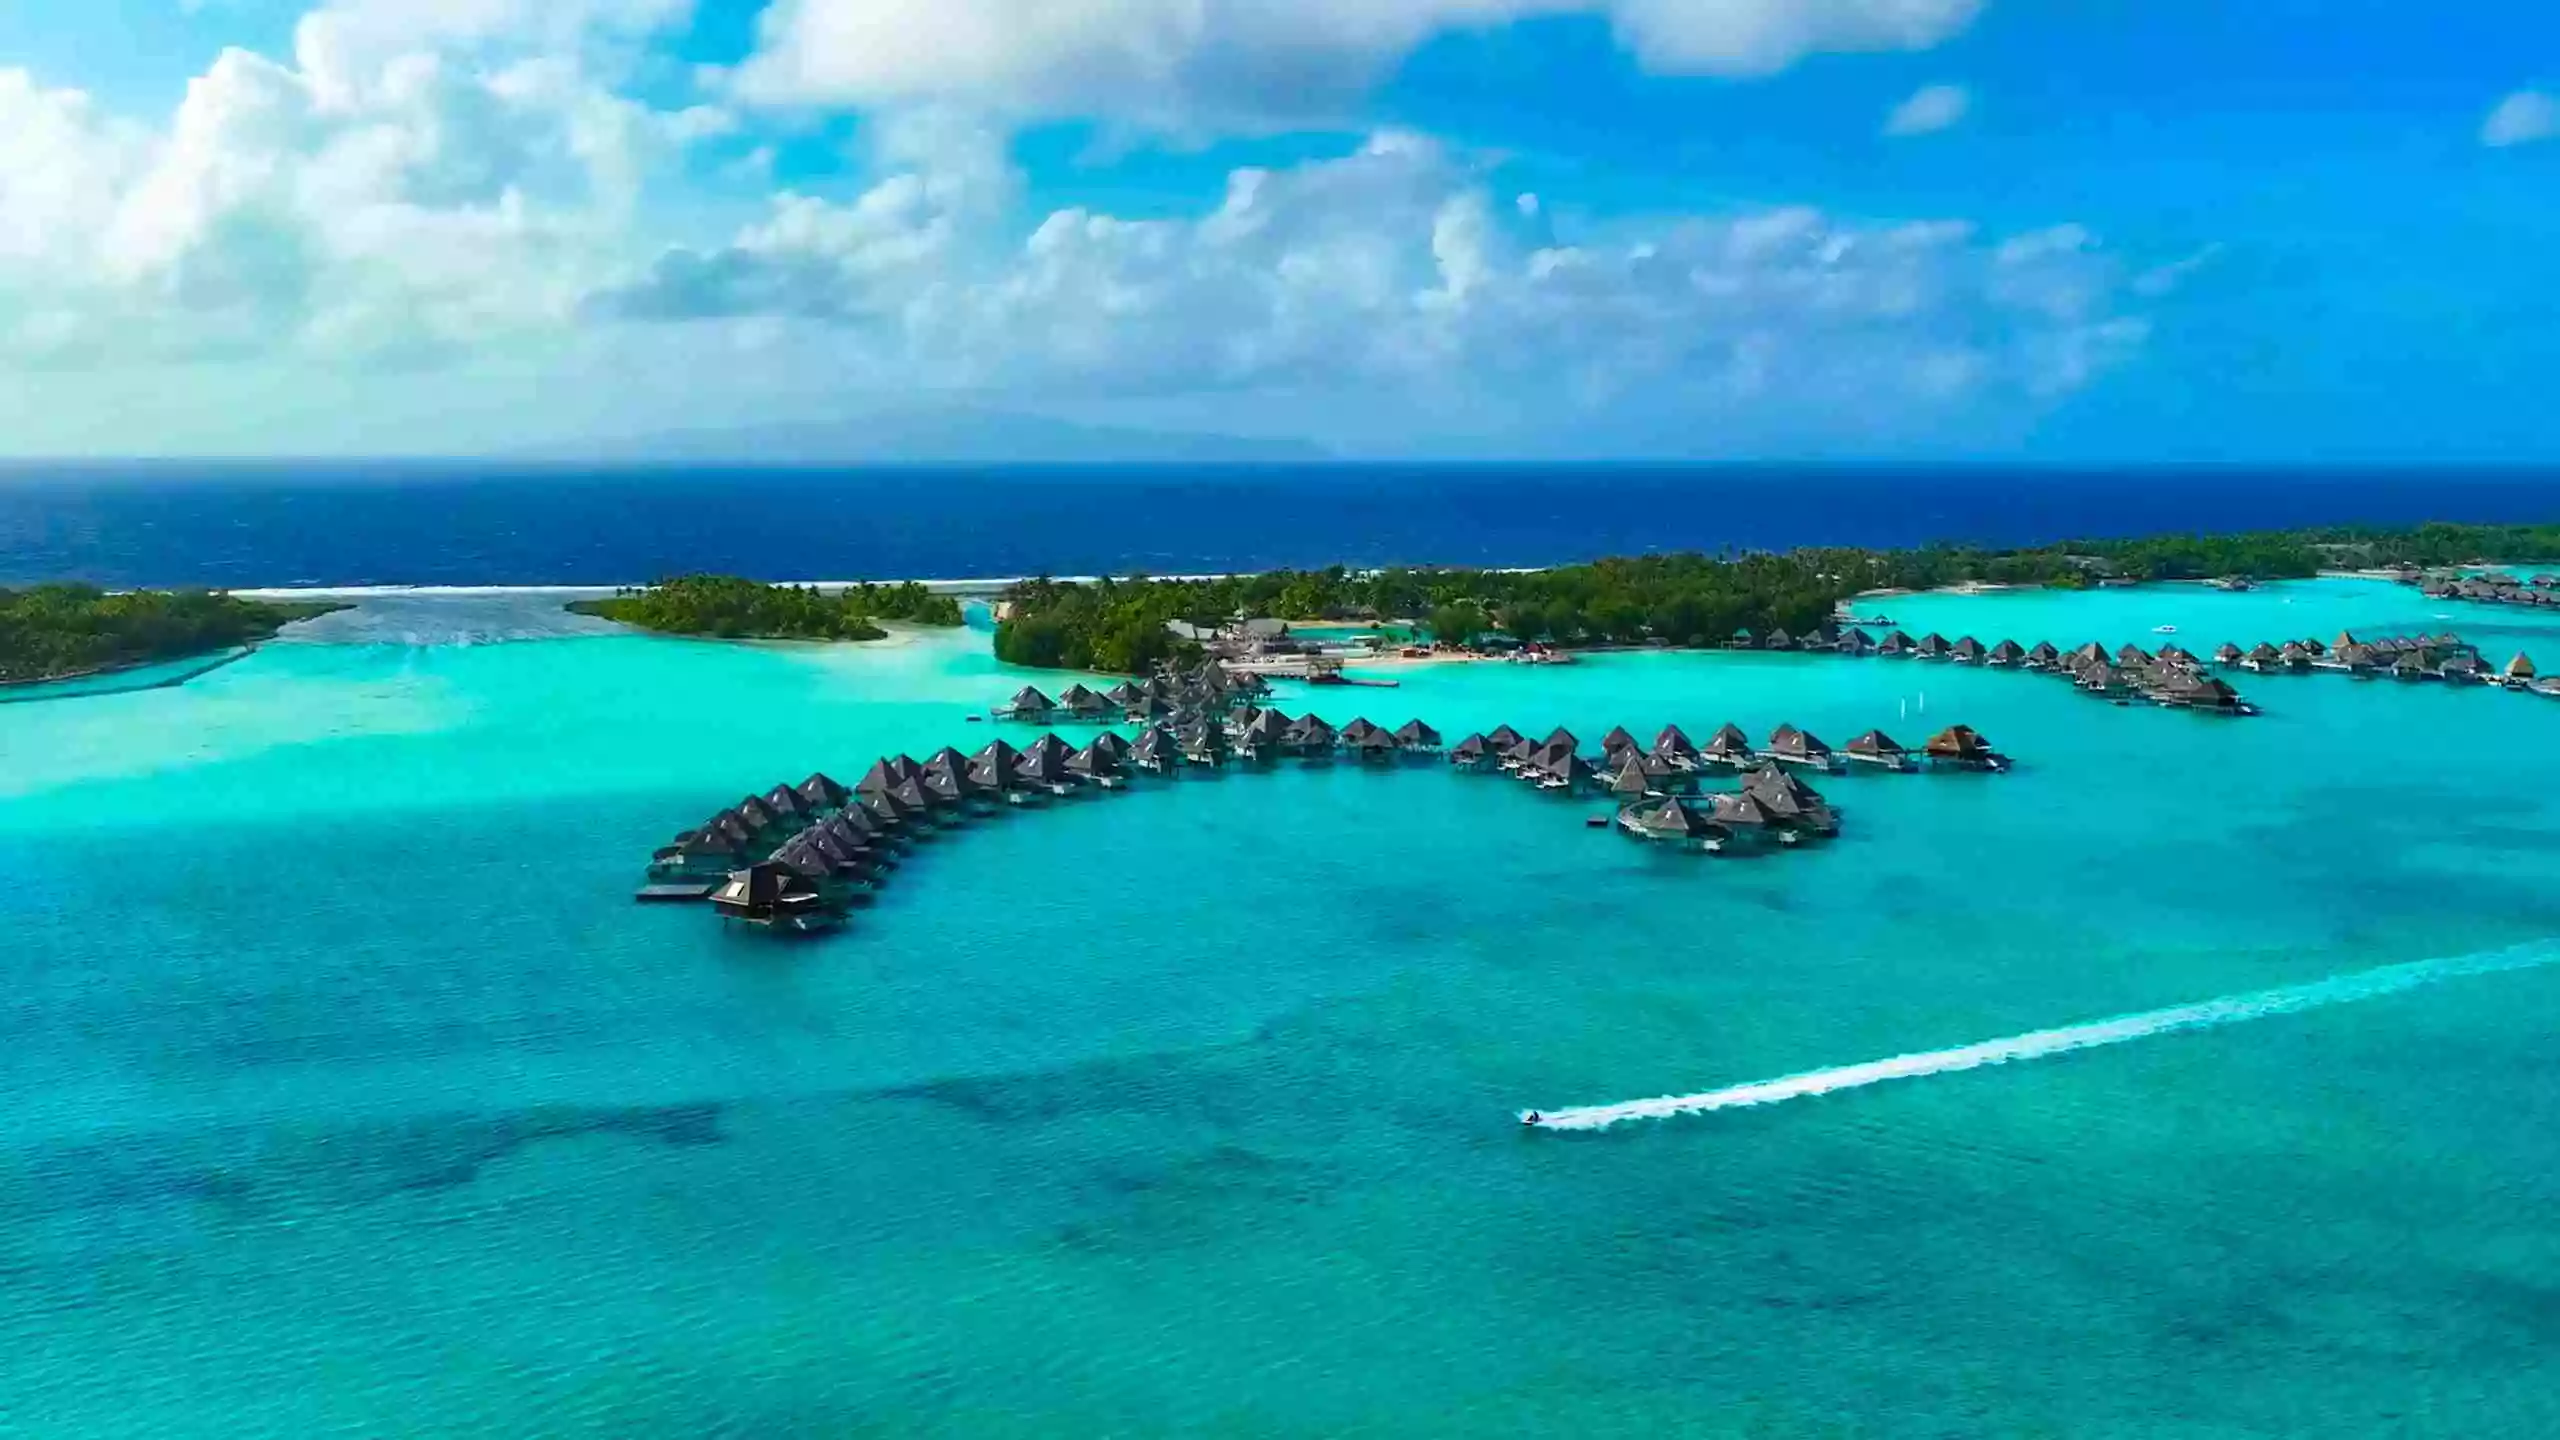 How Much Would a Round Trip to Bora Bora Cost from USA